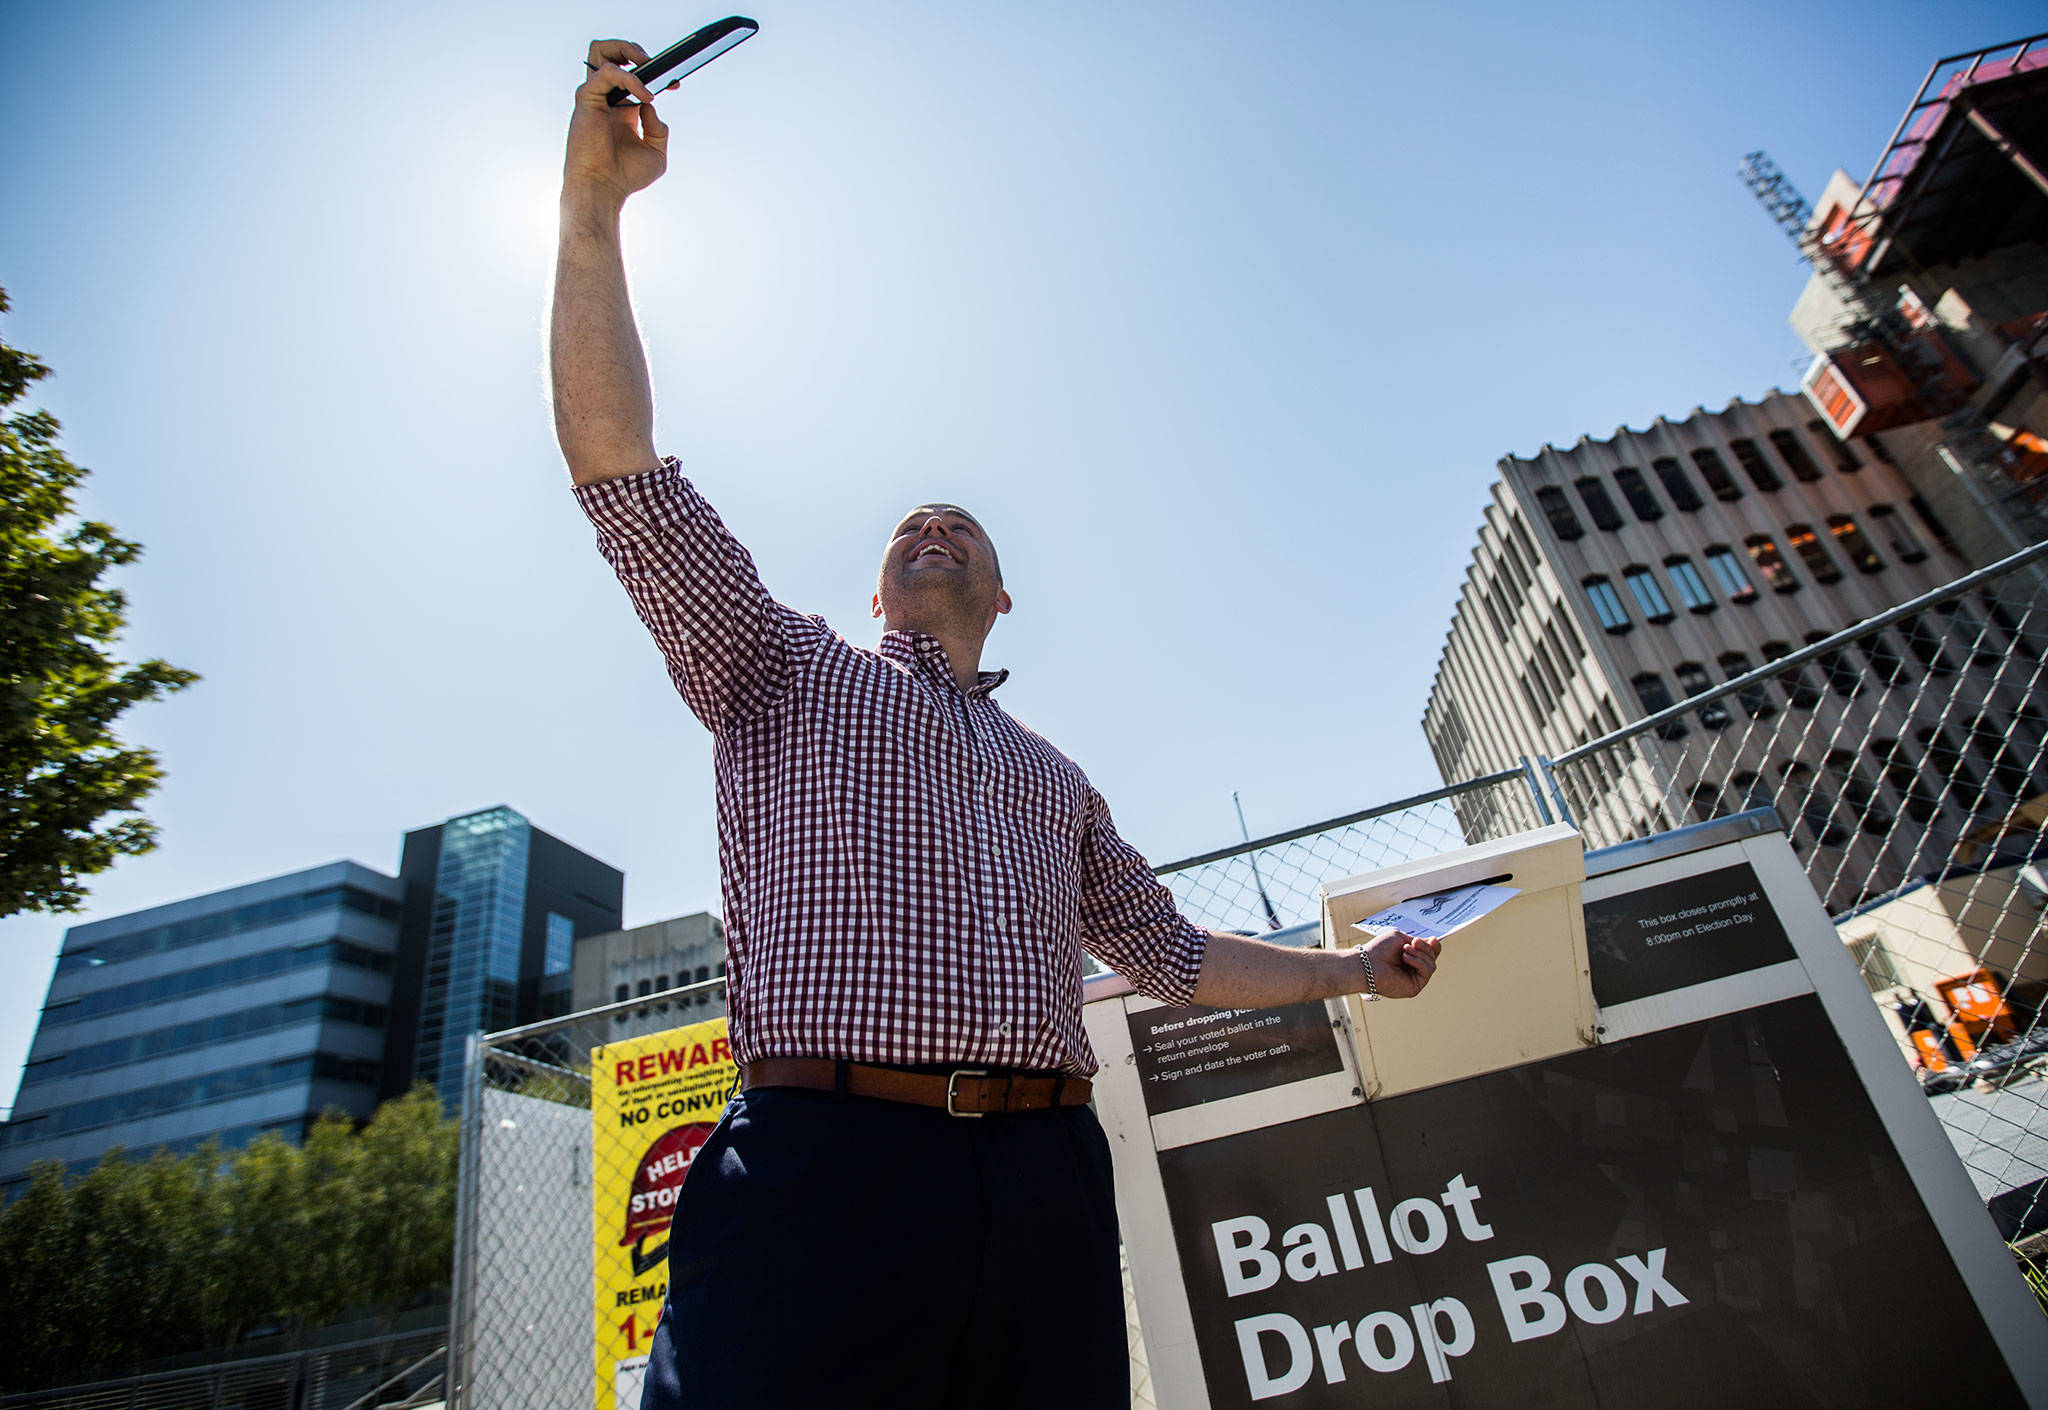 Snohomish County County Council District 2 candidate Alex Lark stops to take a photo before dropping his ballot in box on the Snohomish County Campus Plaza on Tuesday in Everett. (Olivia Vanni / The Herald)